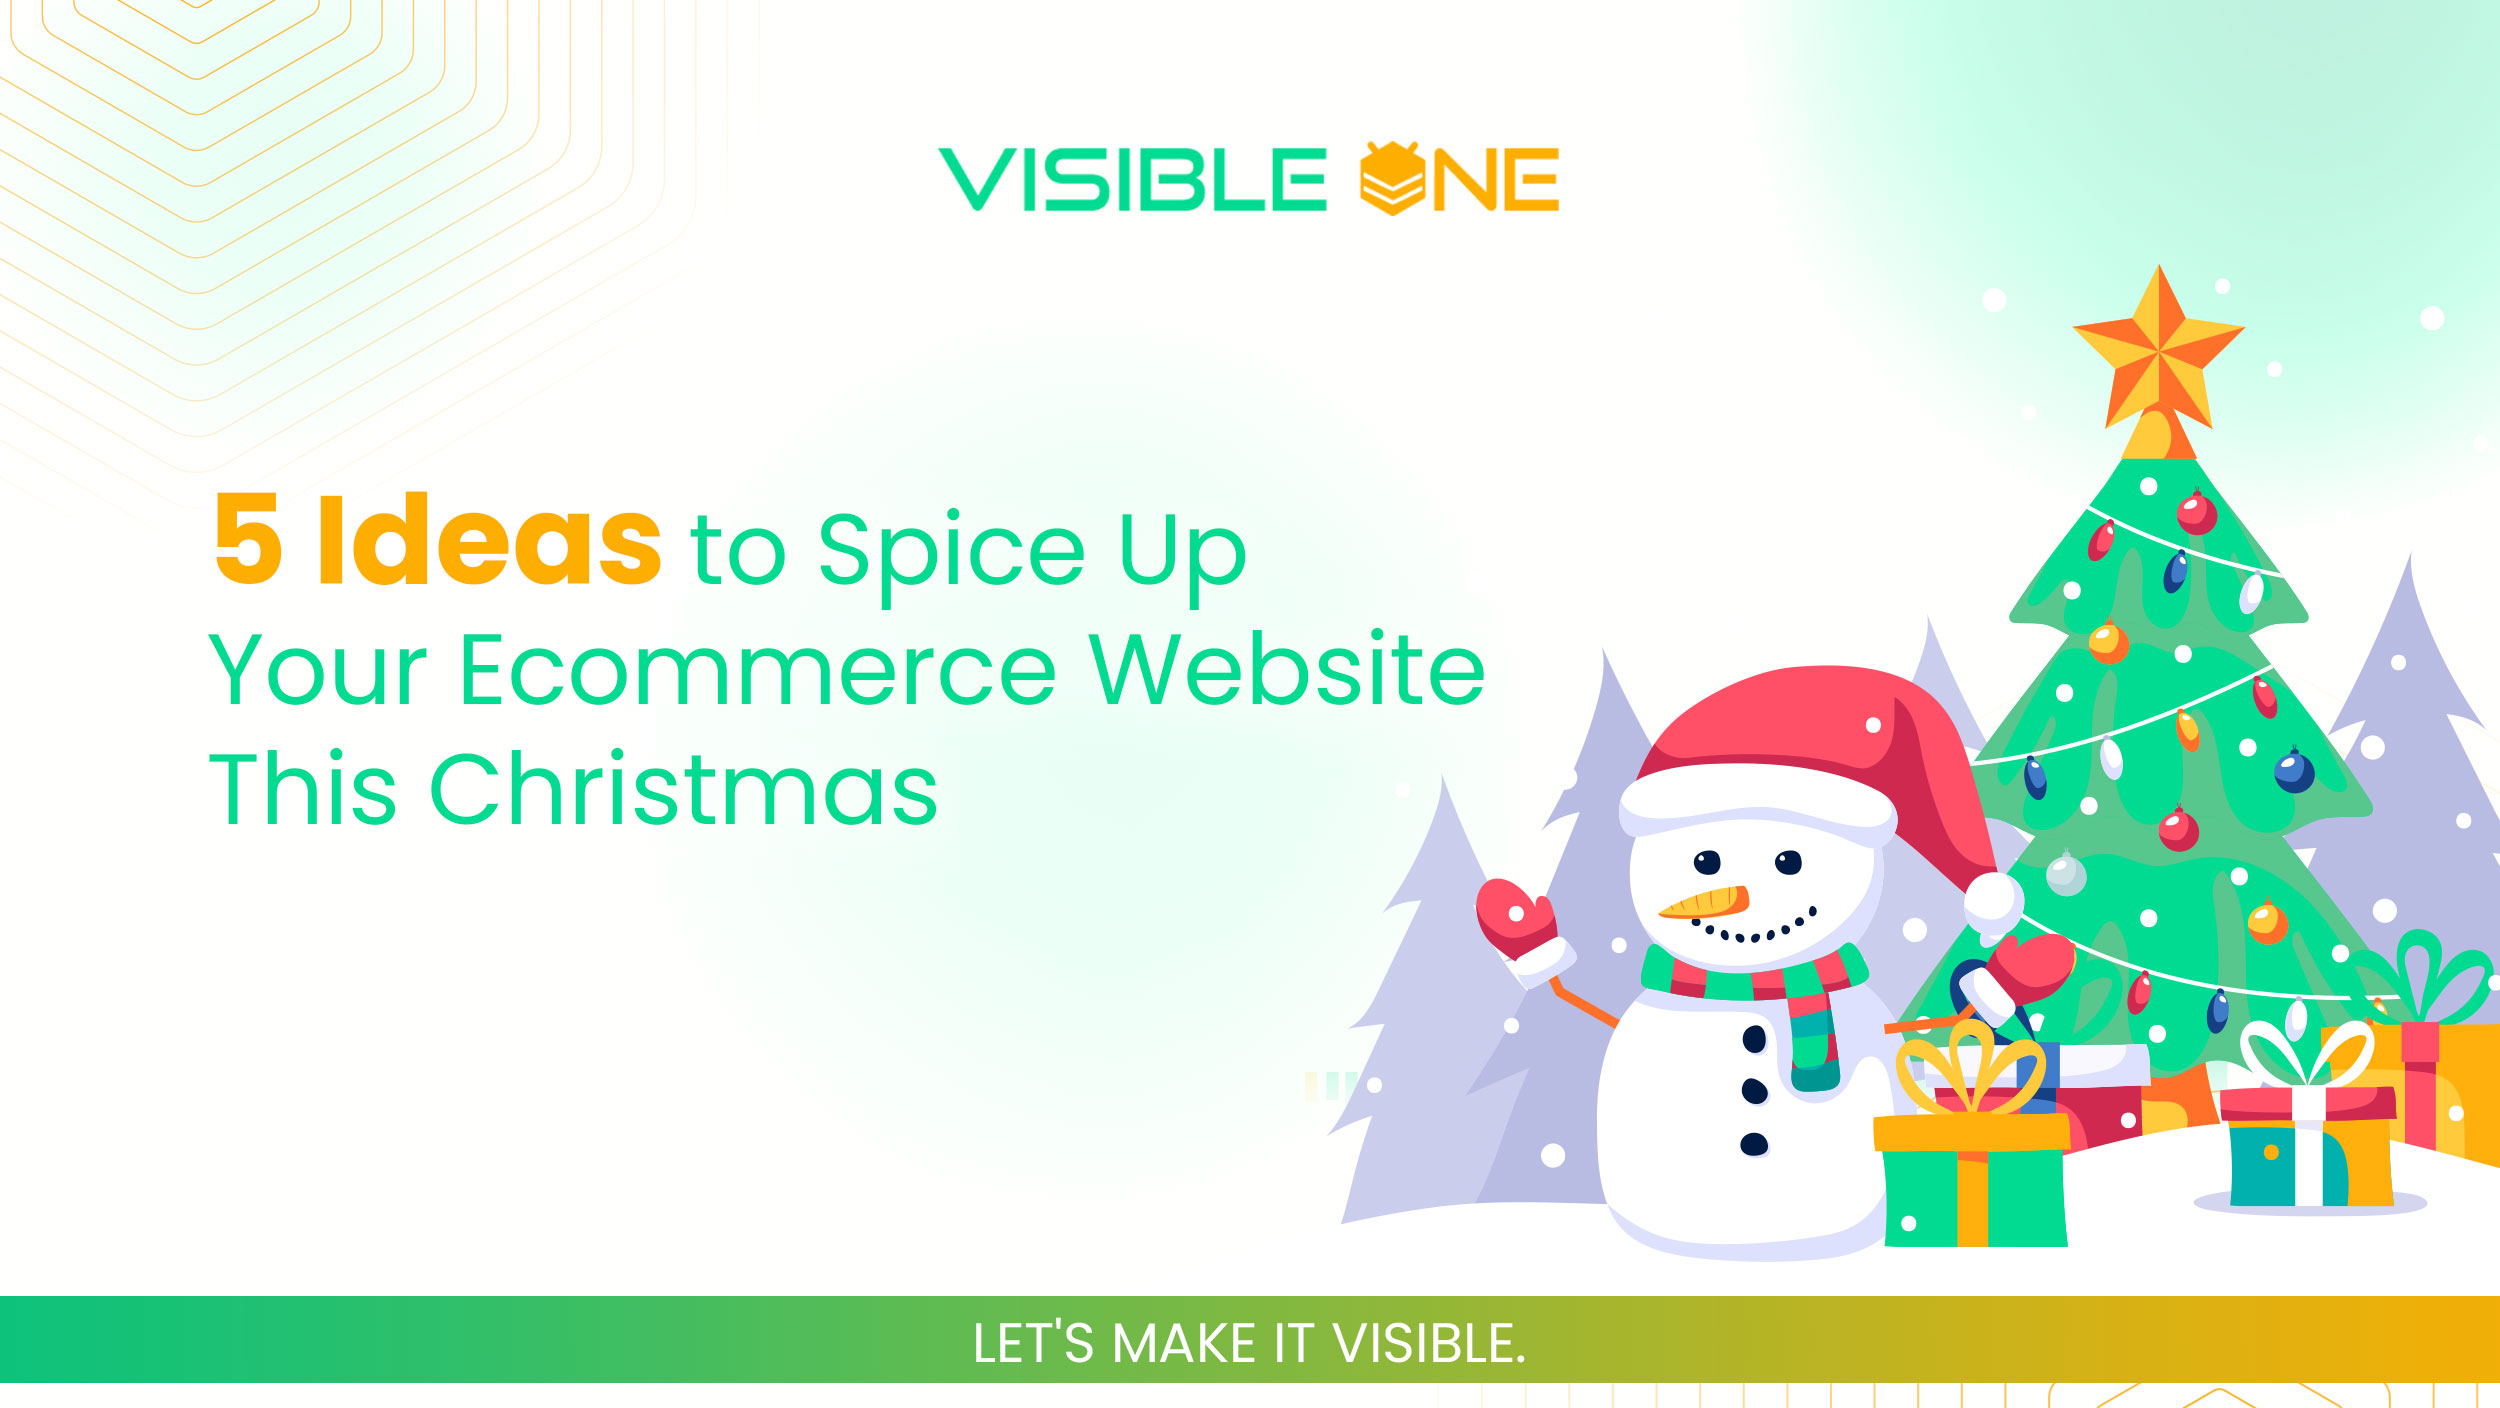 5 Ideas to Spice Up Your Ecommerce Website This Christmas